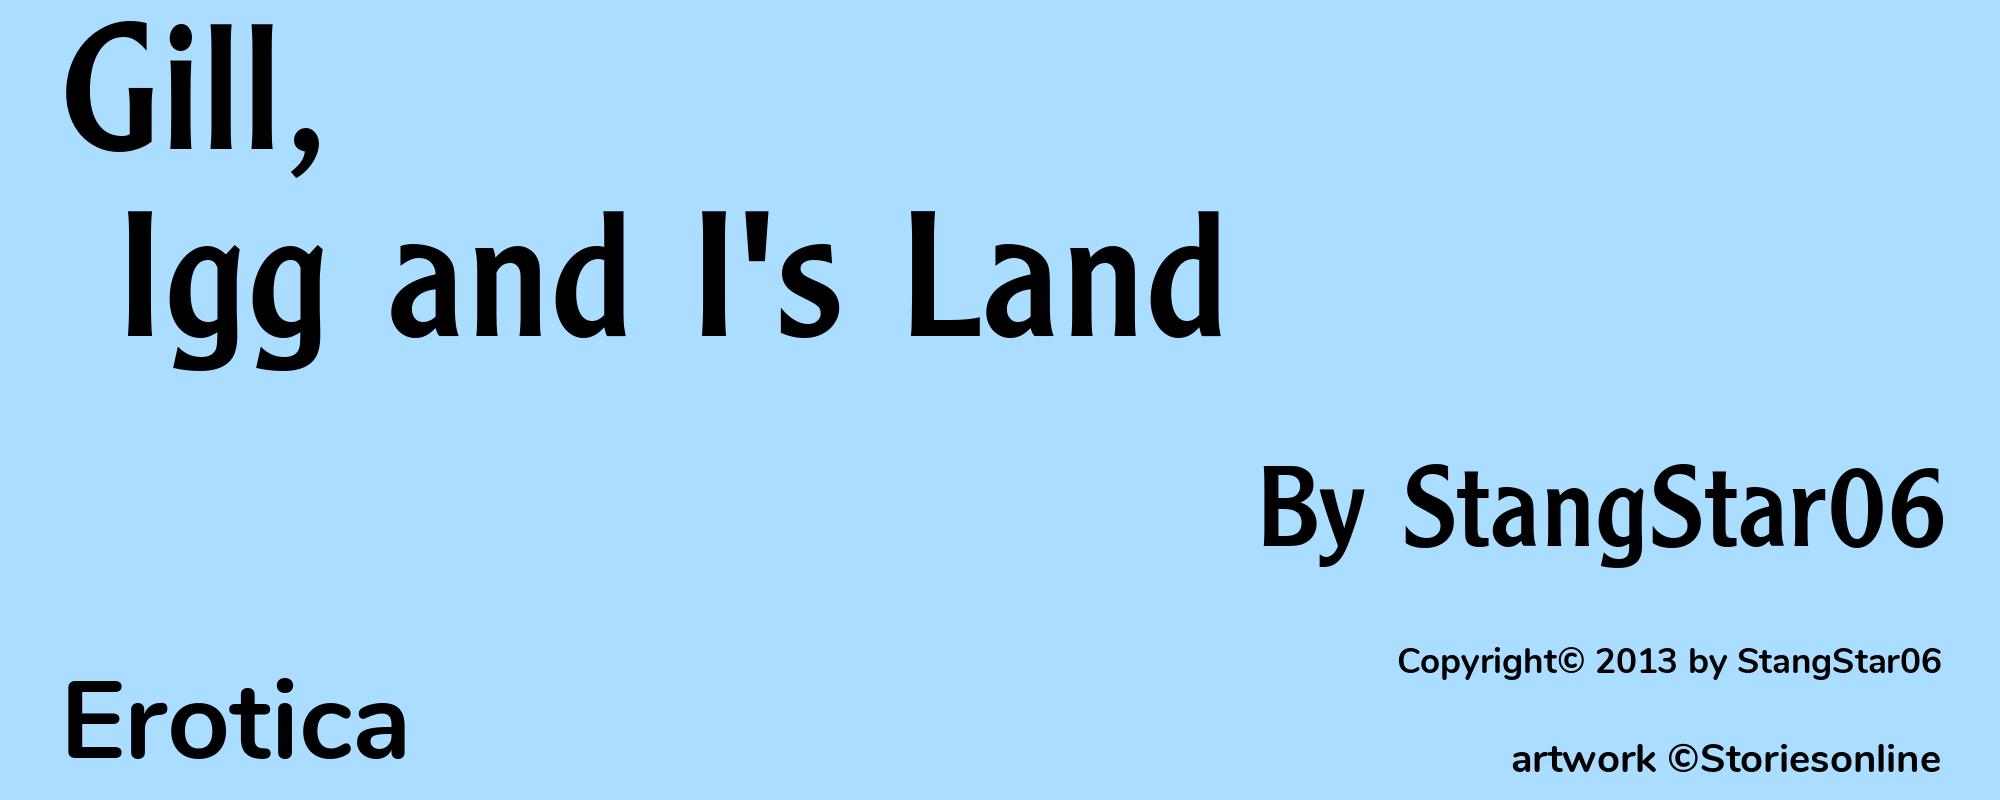 Gill, Igg and I's Land - Cover